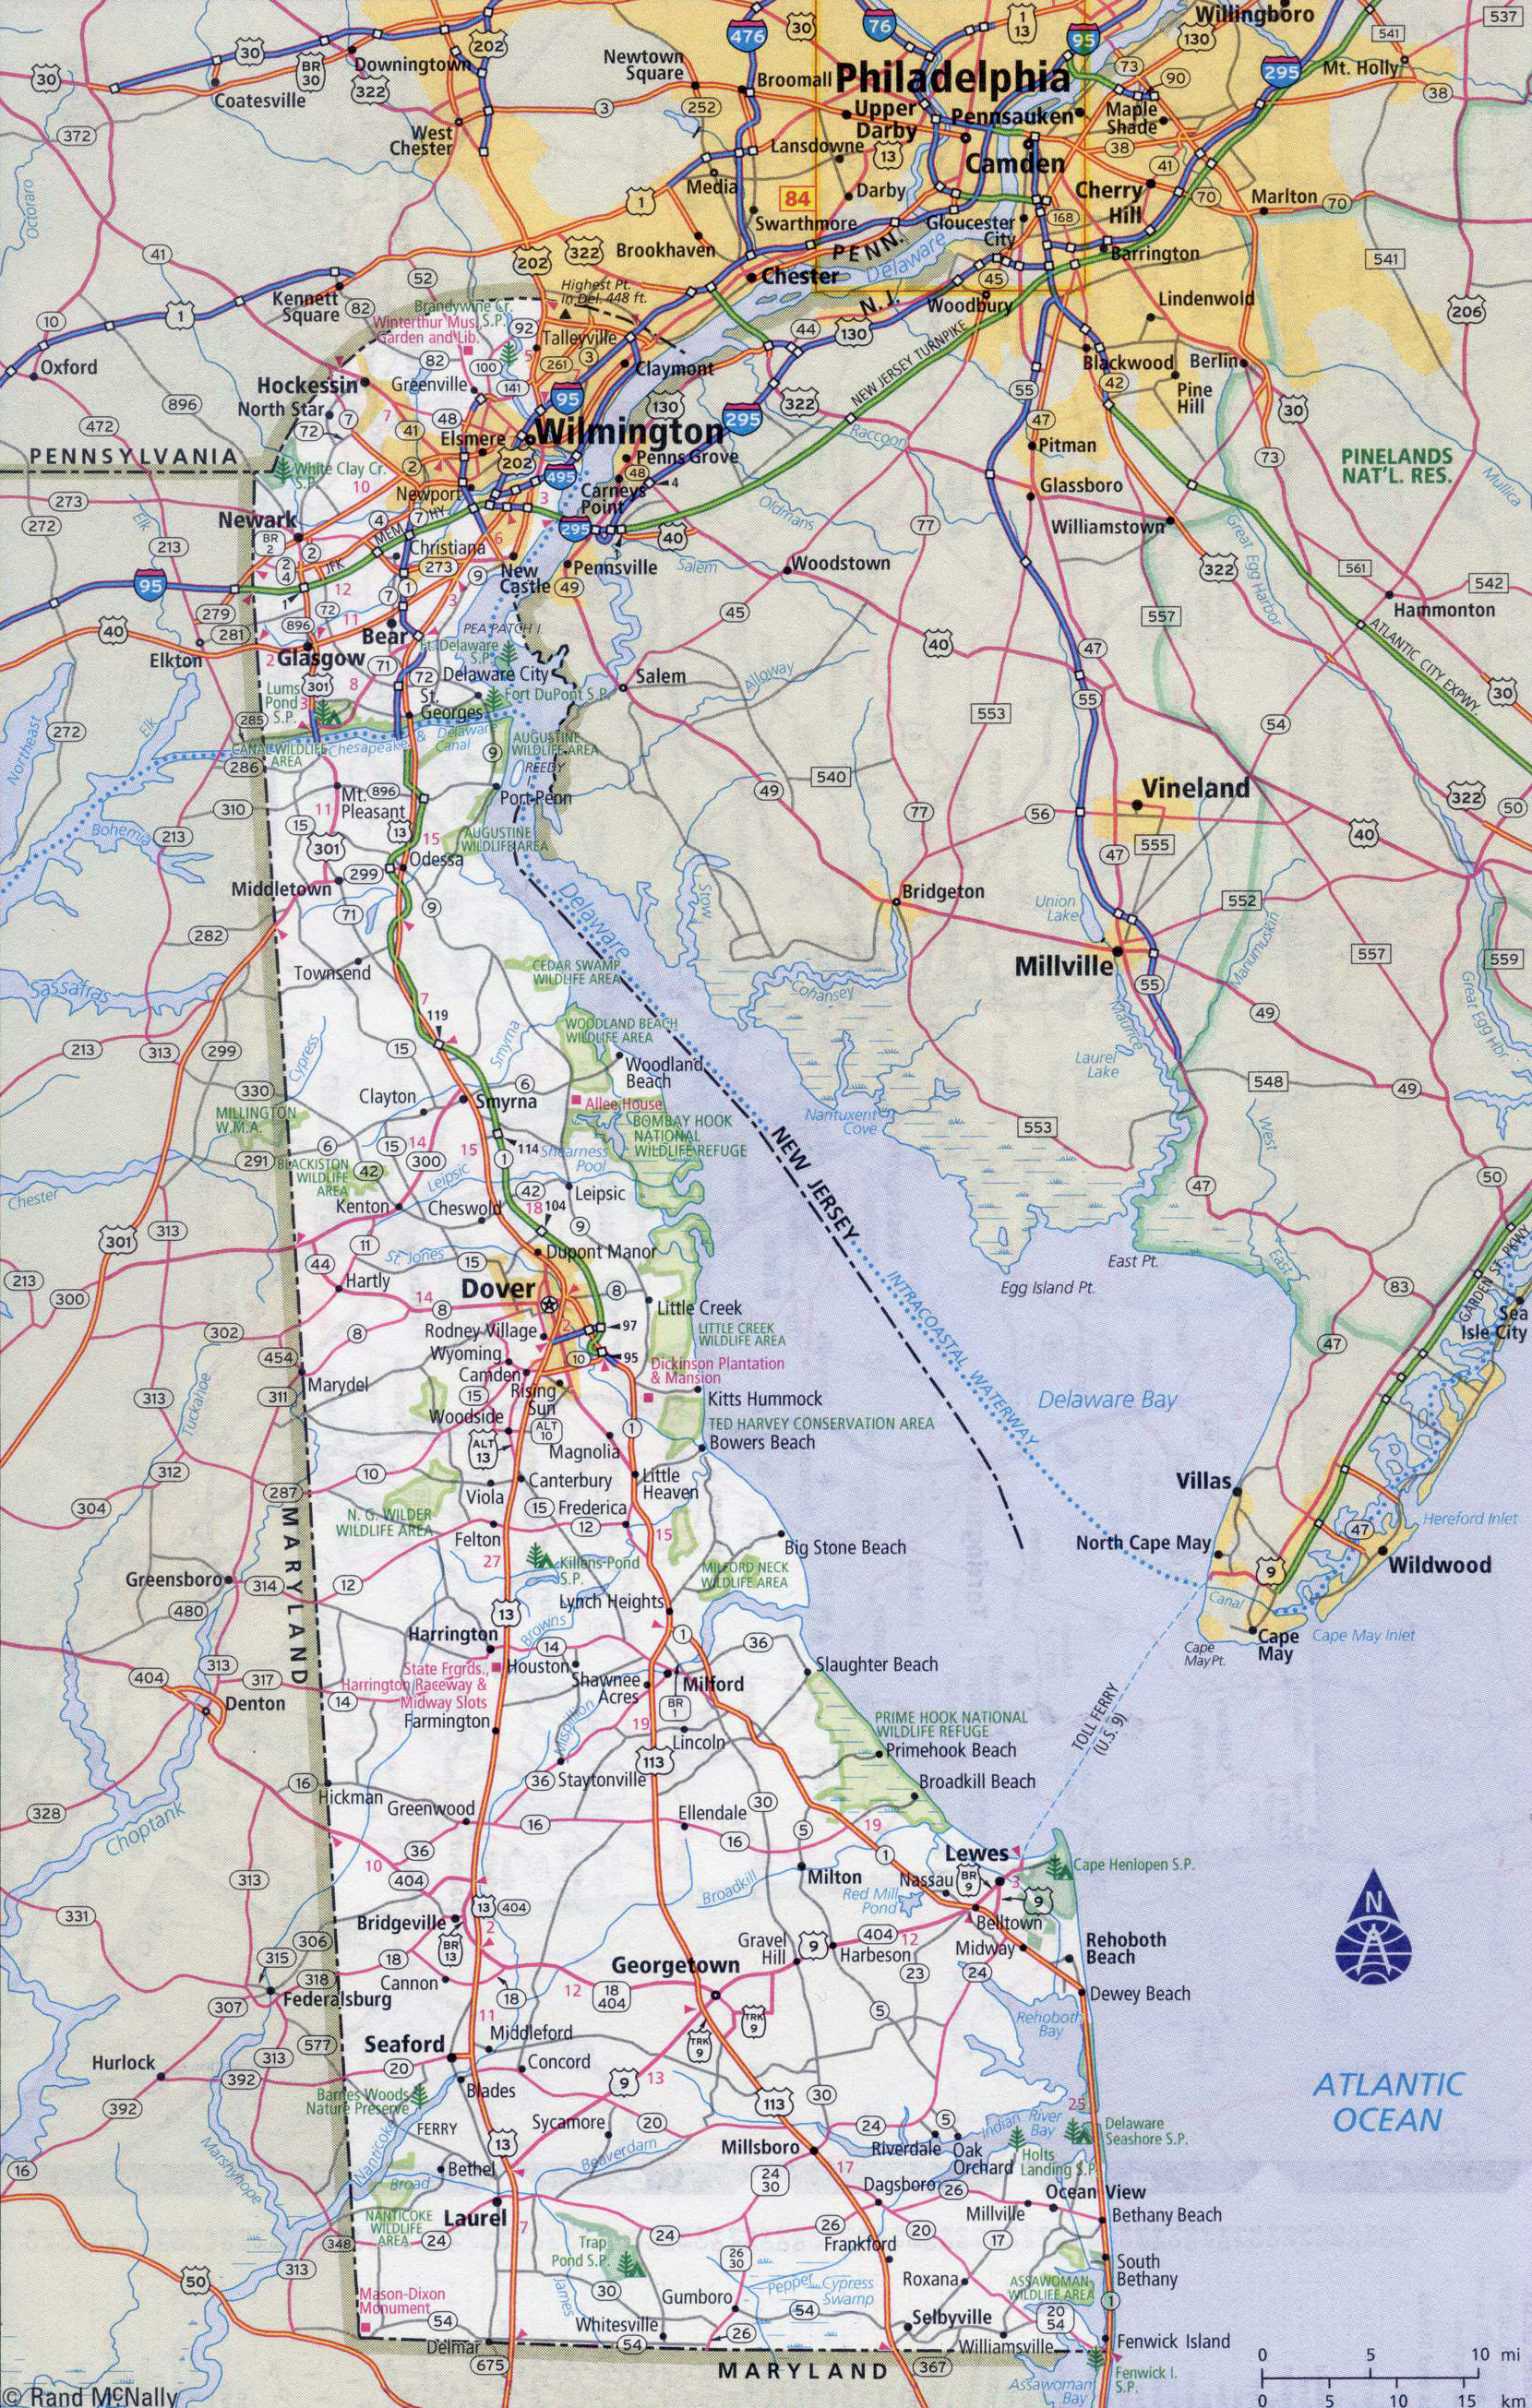 Large Map Of Delaware Large Detailed Roads And Highways Map Of Delaware State With All Cities |  Delaware State | Usa | Maps Of The Usa | Maps Collection Of The United  States Of America